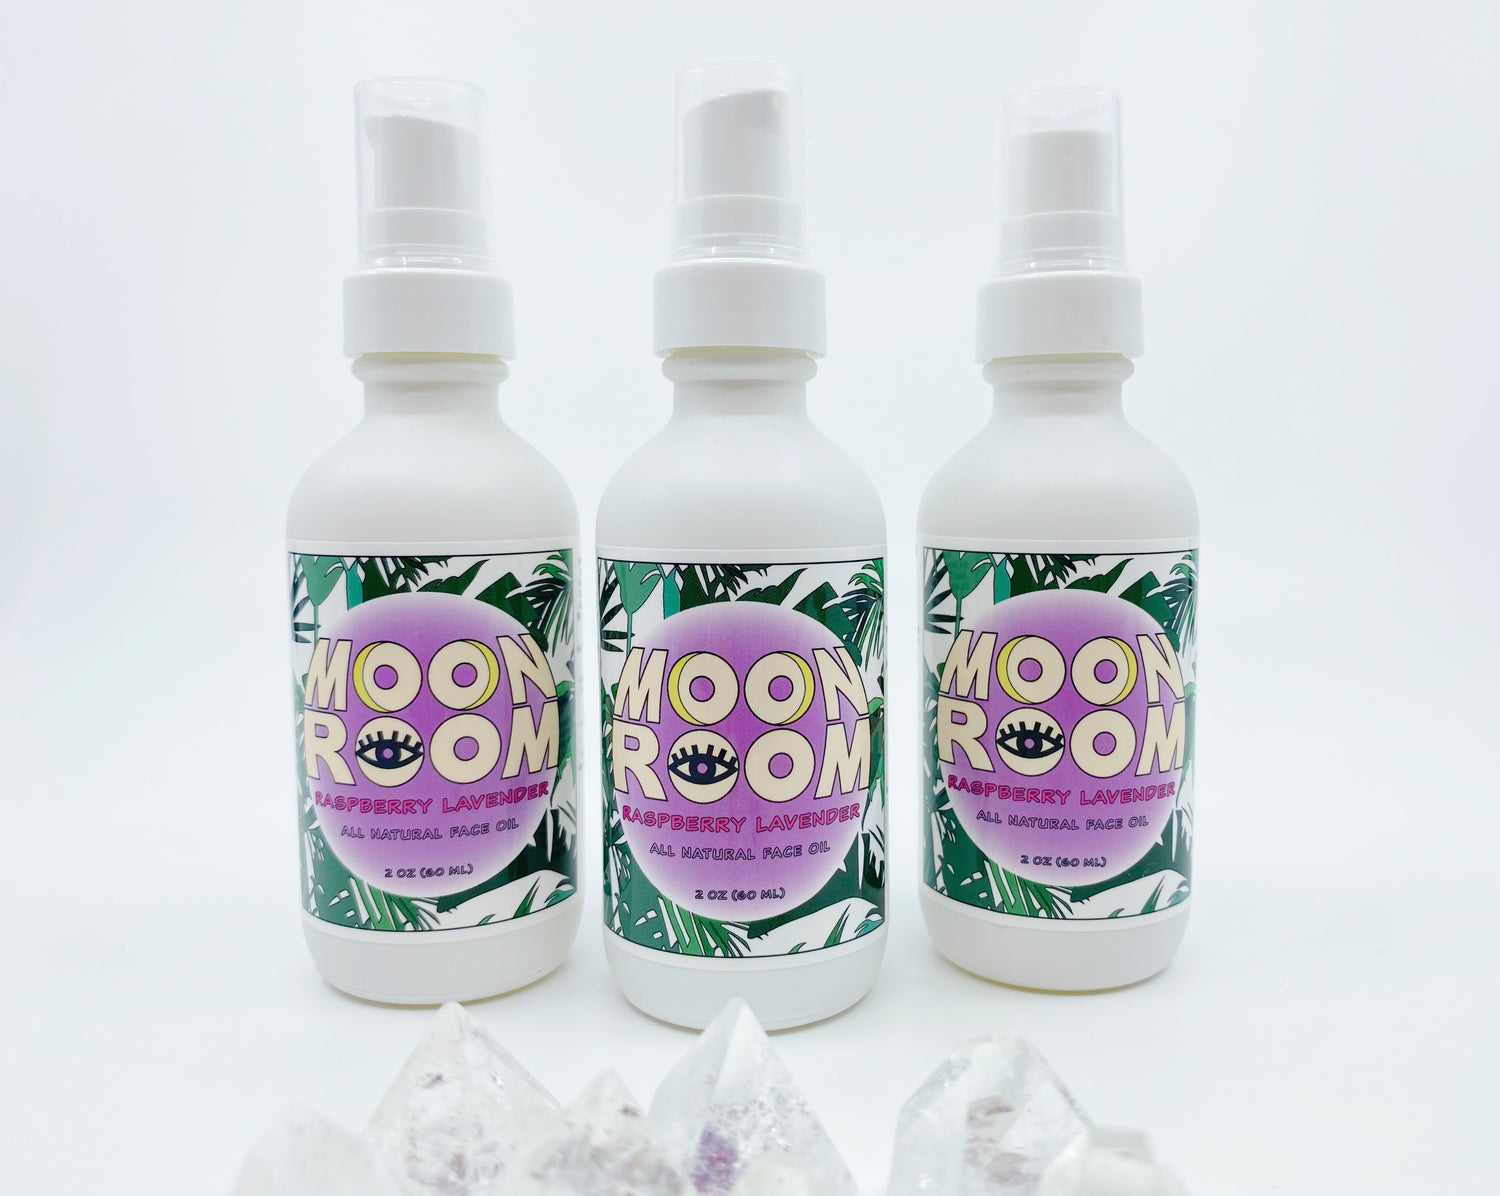 Moon Room Raspberry Lavender Face Oil - Moon Room Shop and Wellness